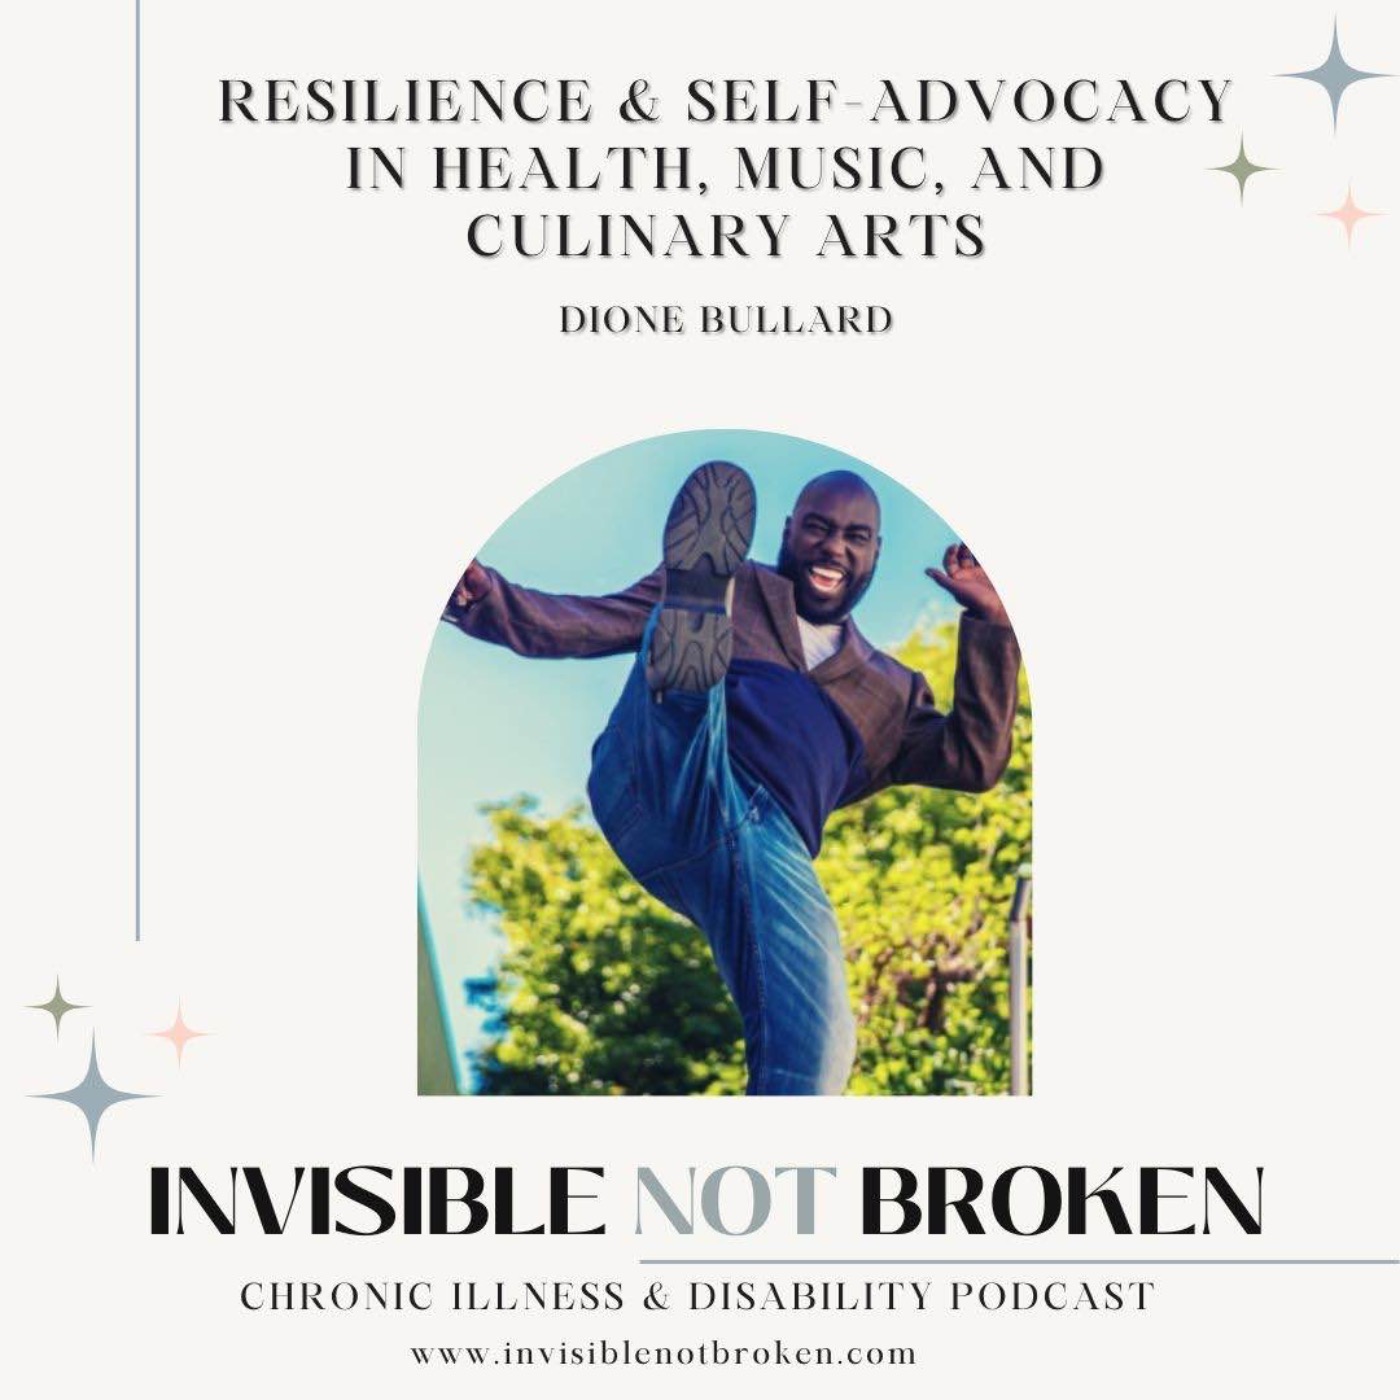 Resilience & Self-Advocacy in Health, Music, and Culinary Arts: Dione Bullard